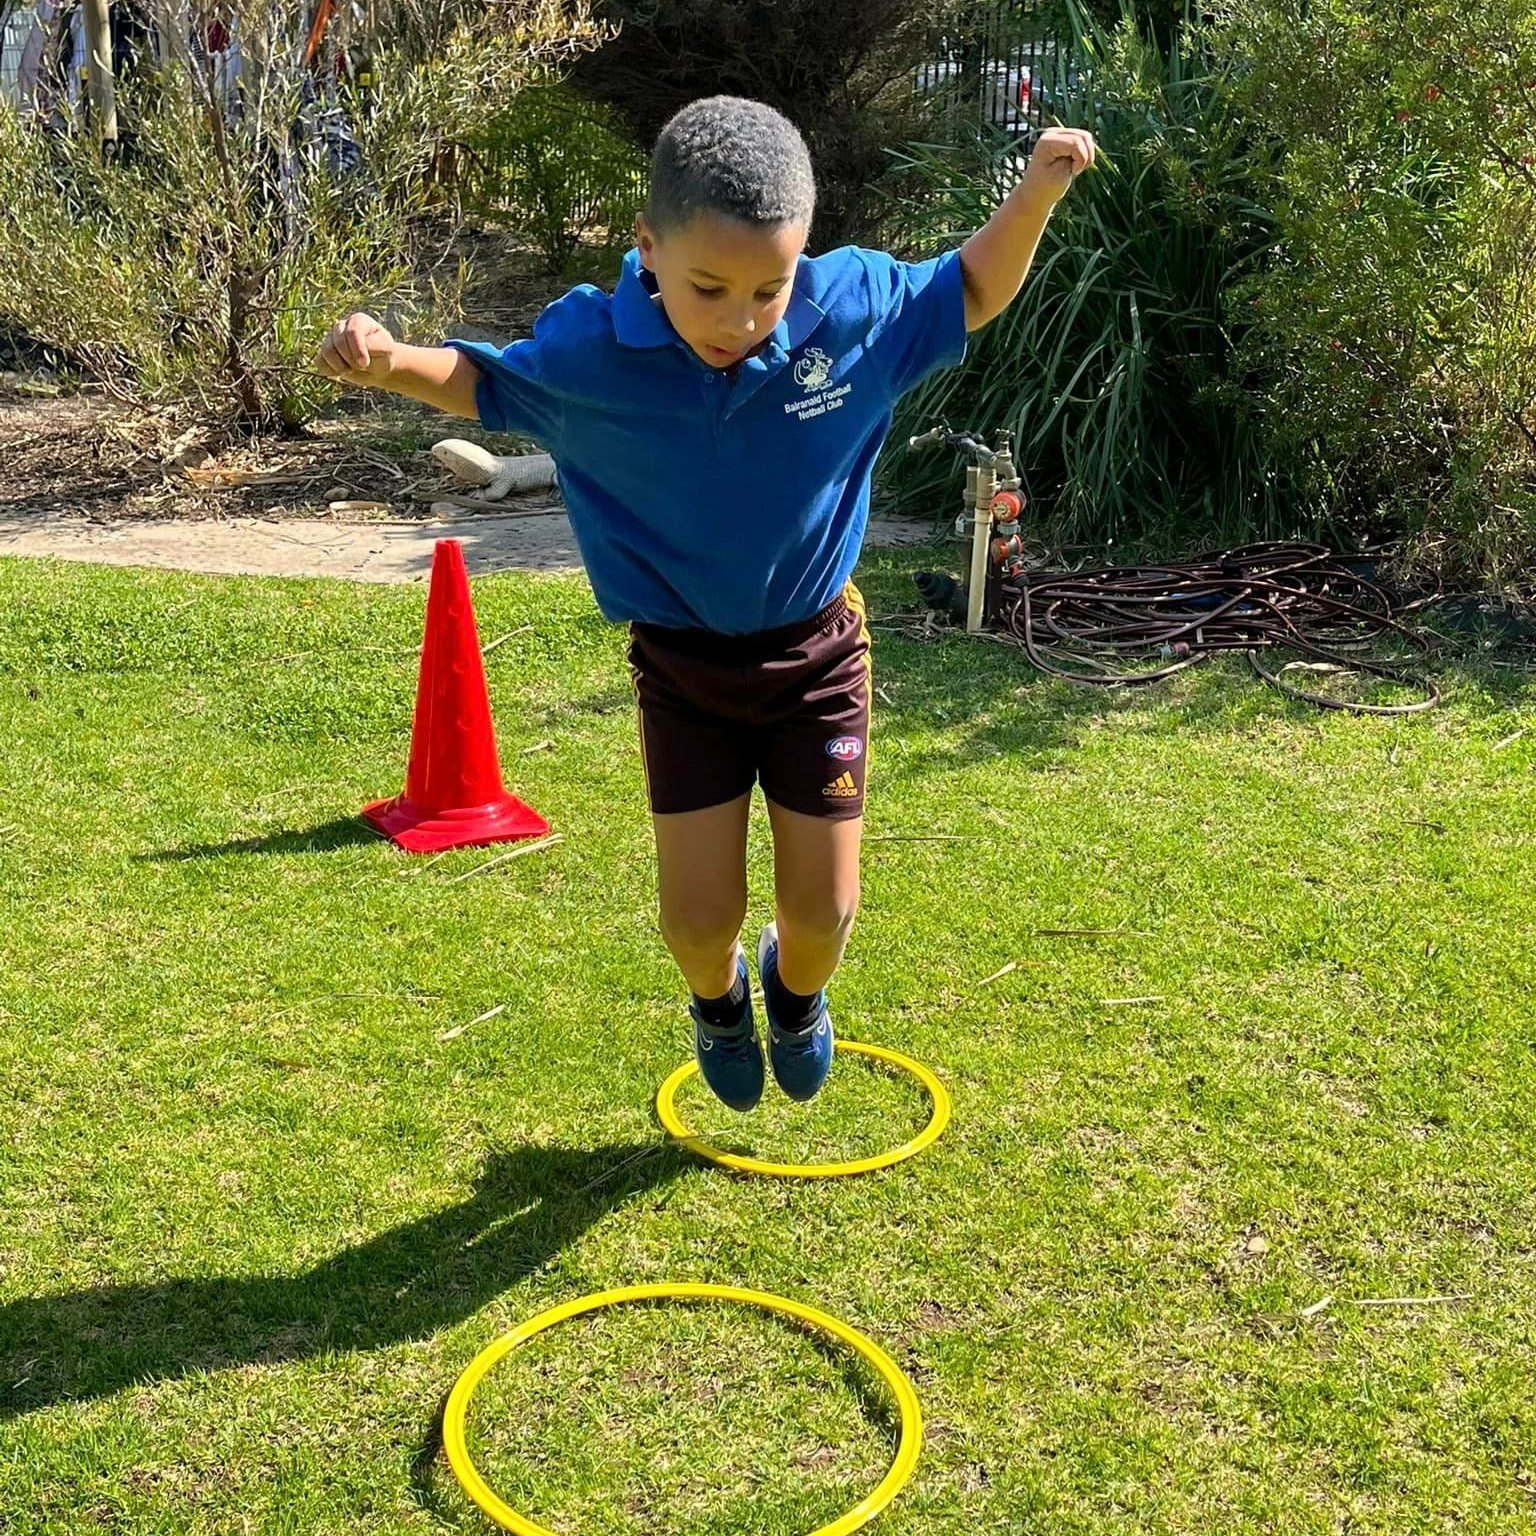 Balranald Early Learning Centre  is hiring!

They are seeking a highly motivated, experienced, passionate and caring Early Childhood Teacher. Previous experience working in Early Childhood is desirable.

Full details in this week's Riverine Grazier o